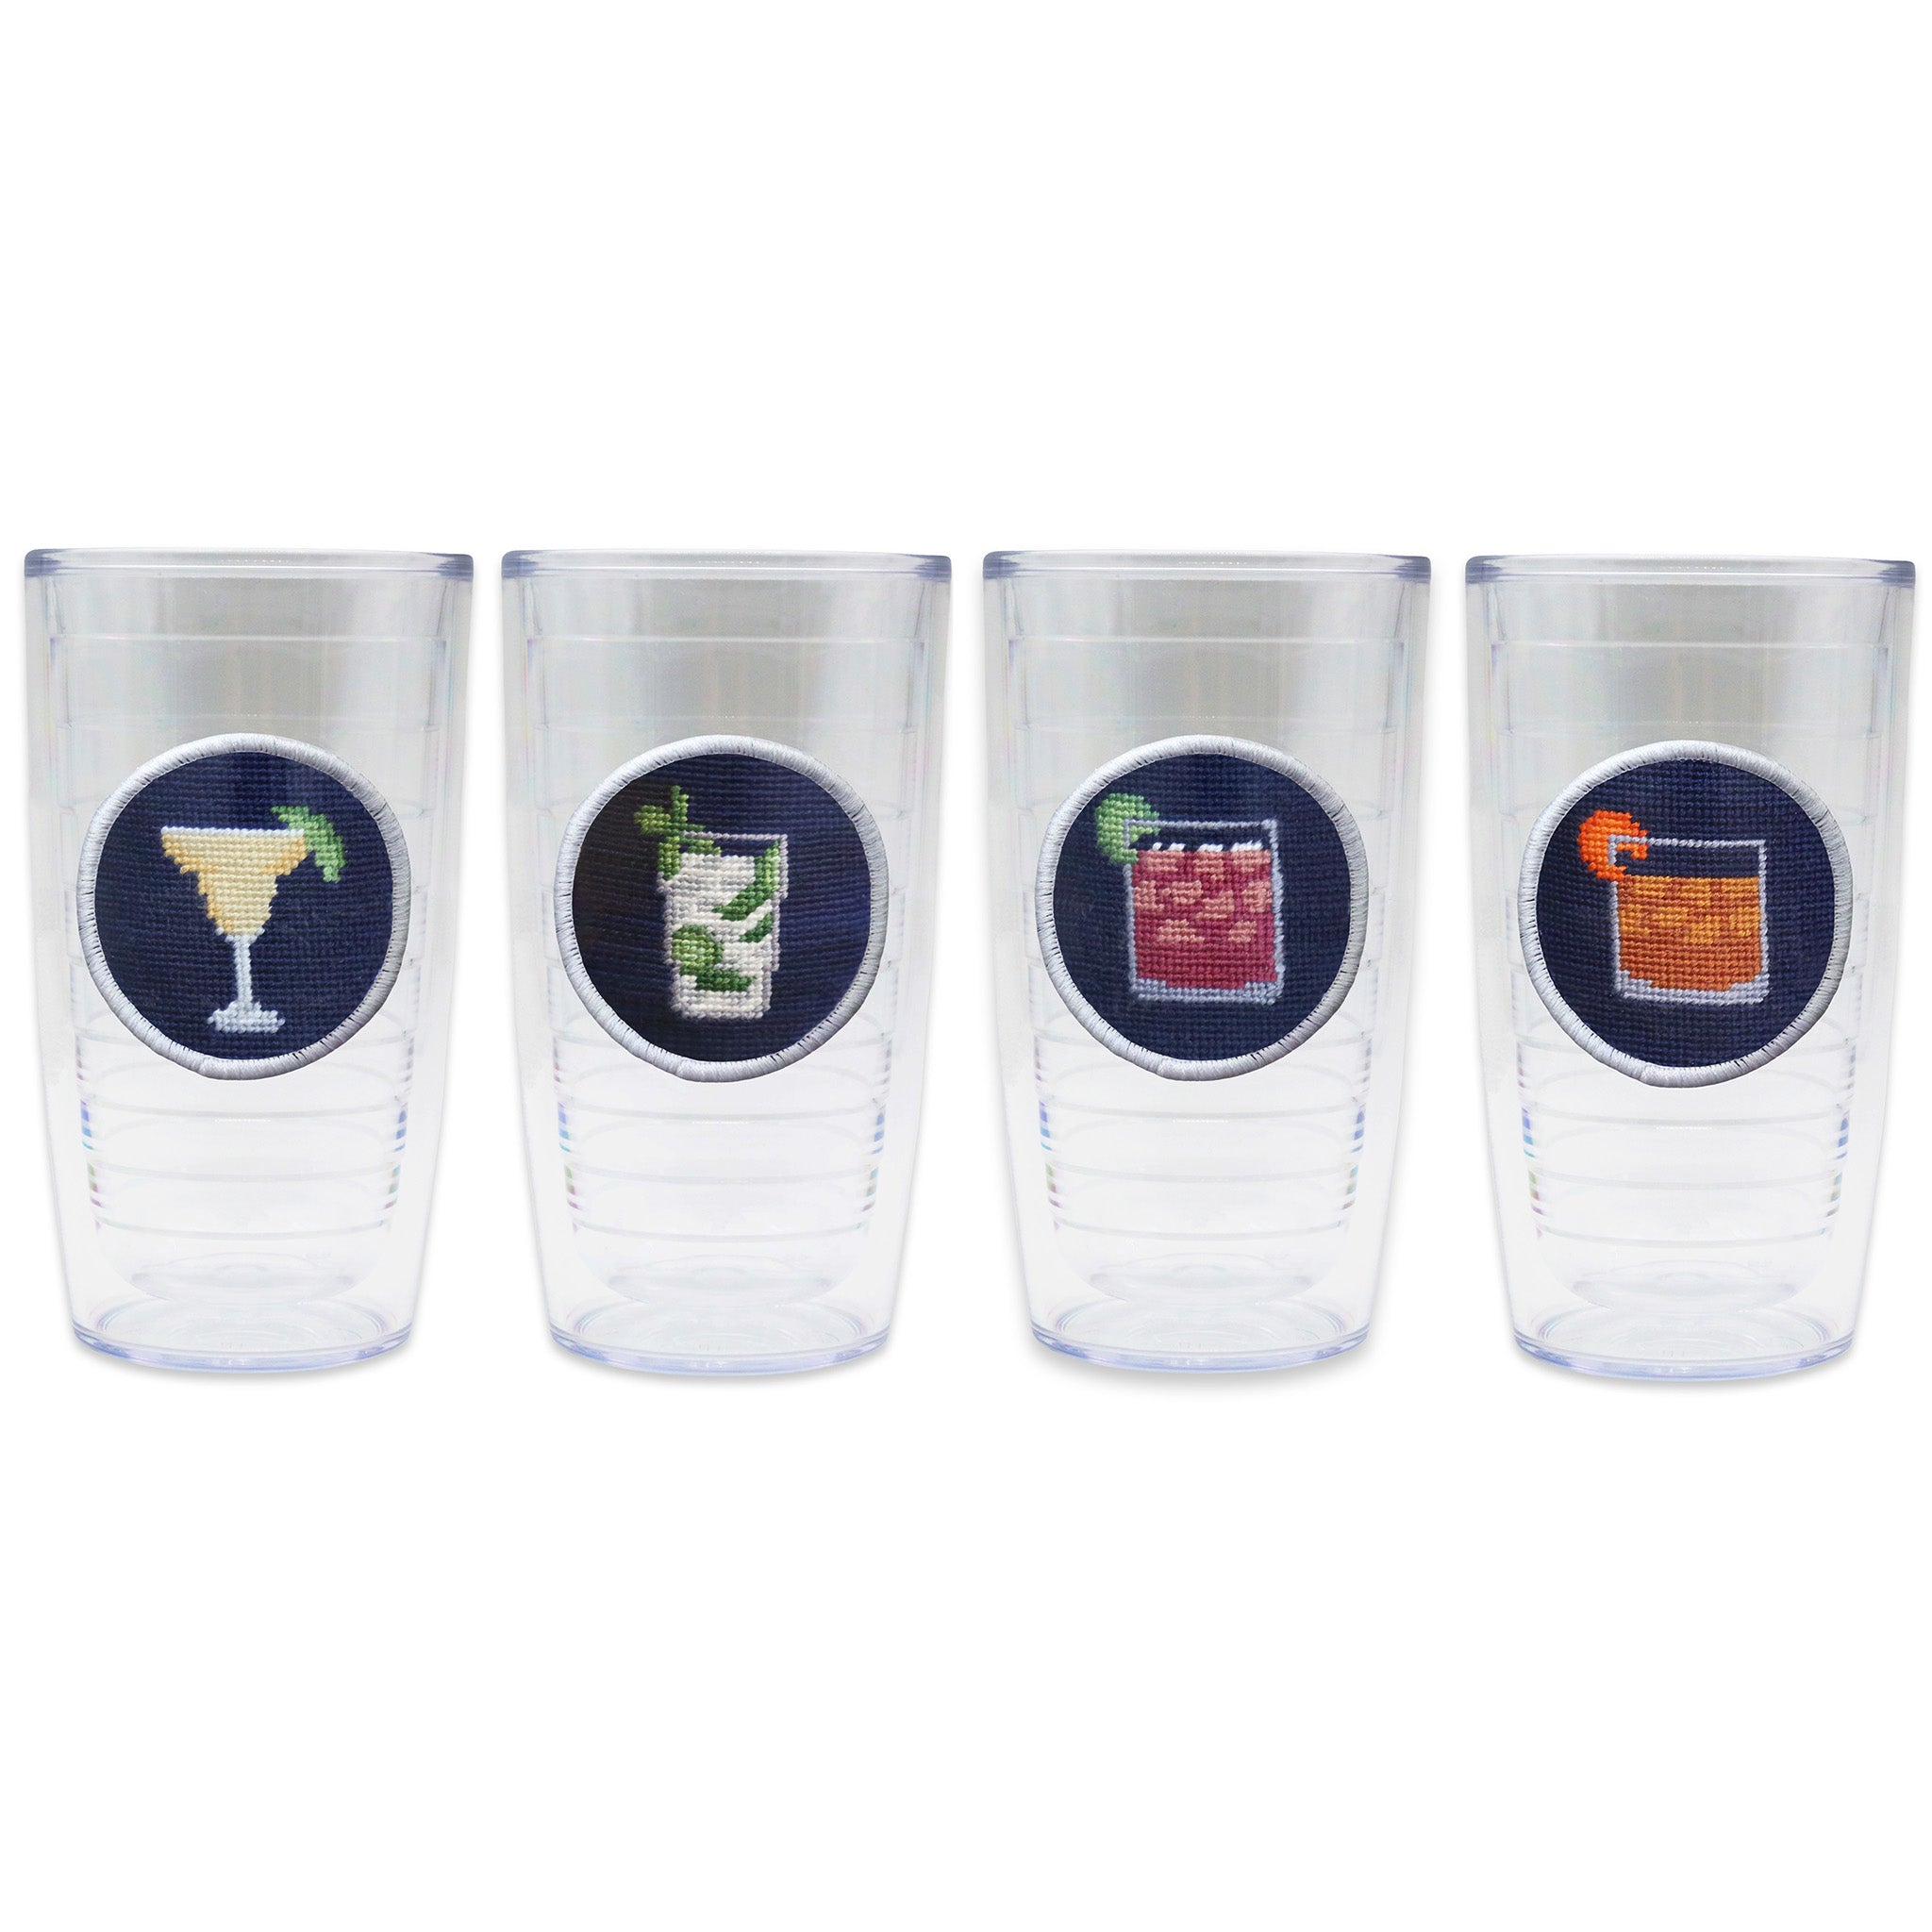 Old Fashioned Tervis Tumbler (Dark Navy)